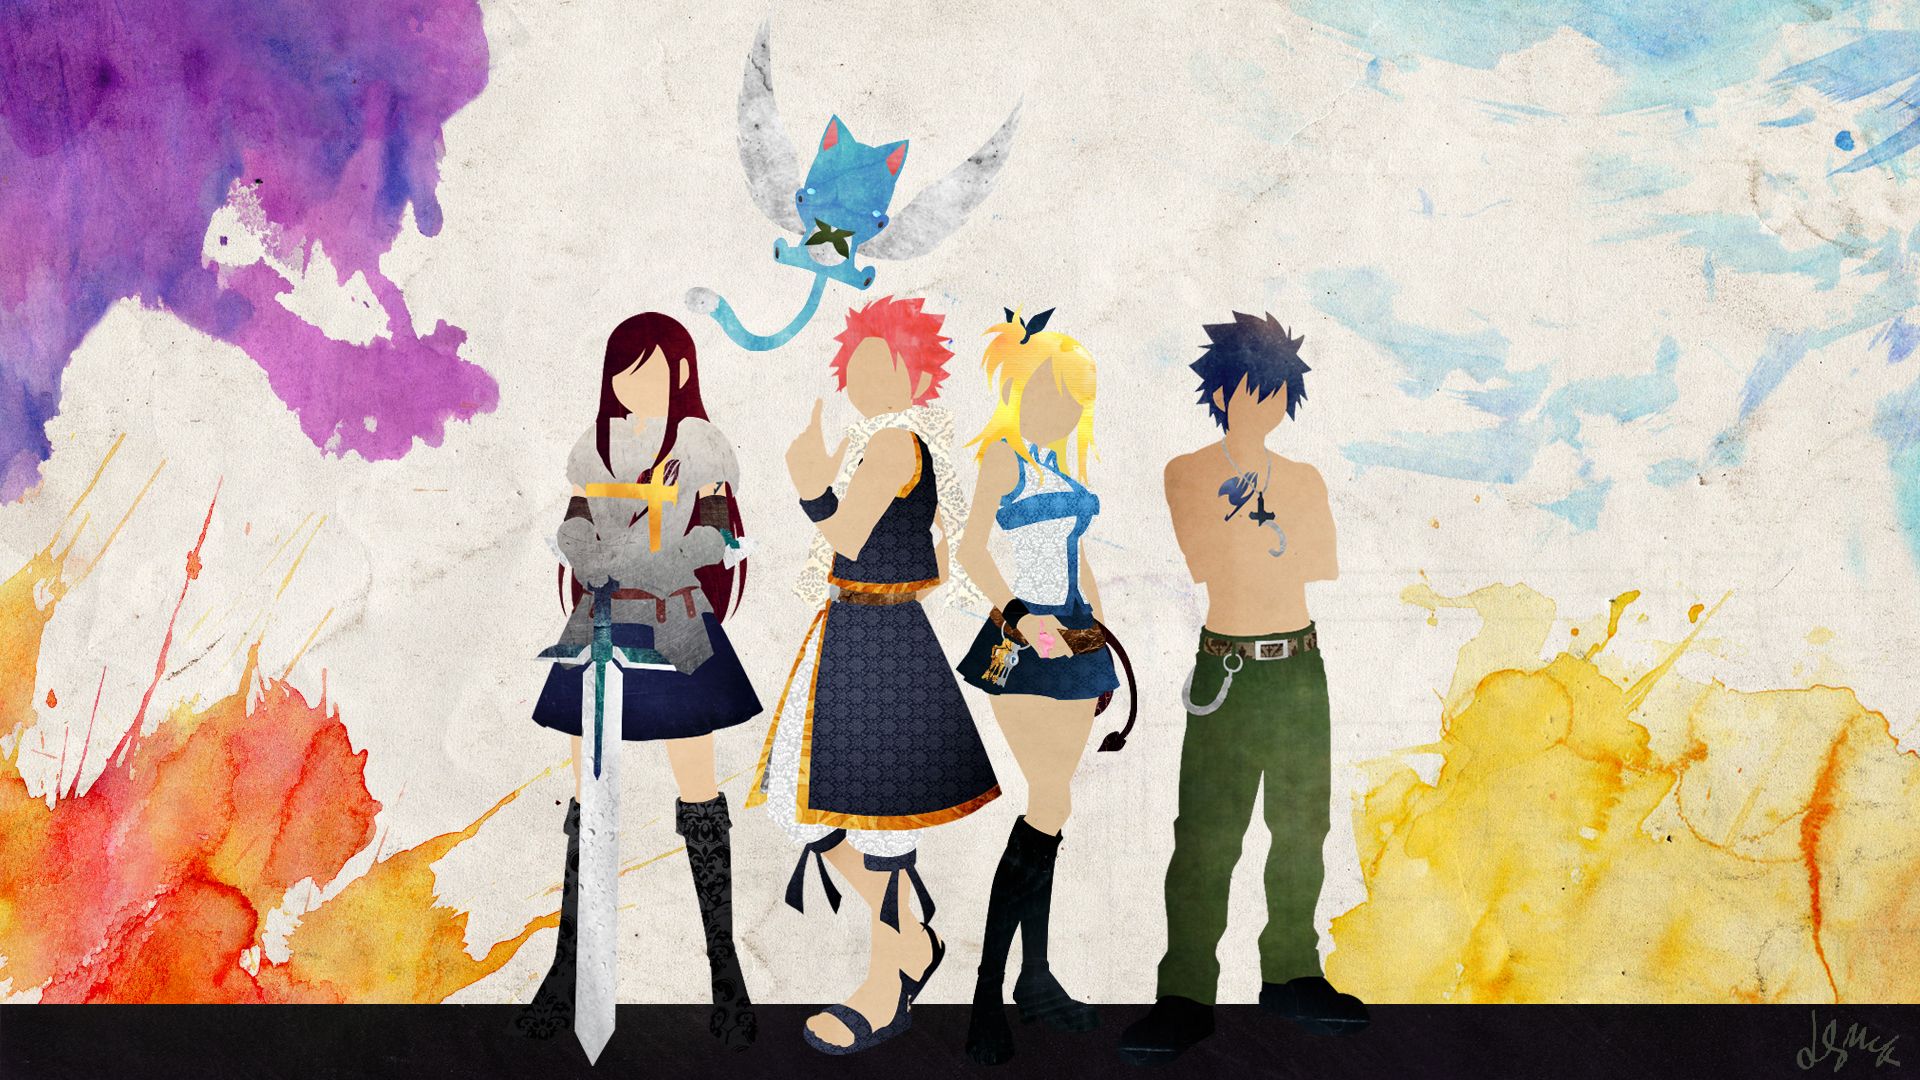 Fairy Tail wallpaper - Anime wallpapers - #26398